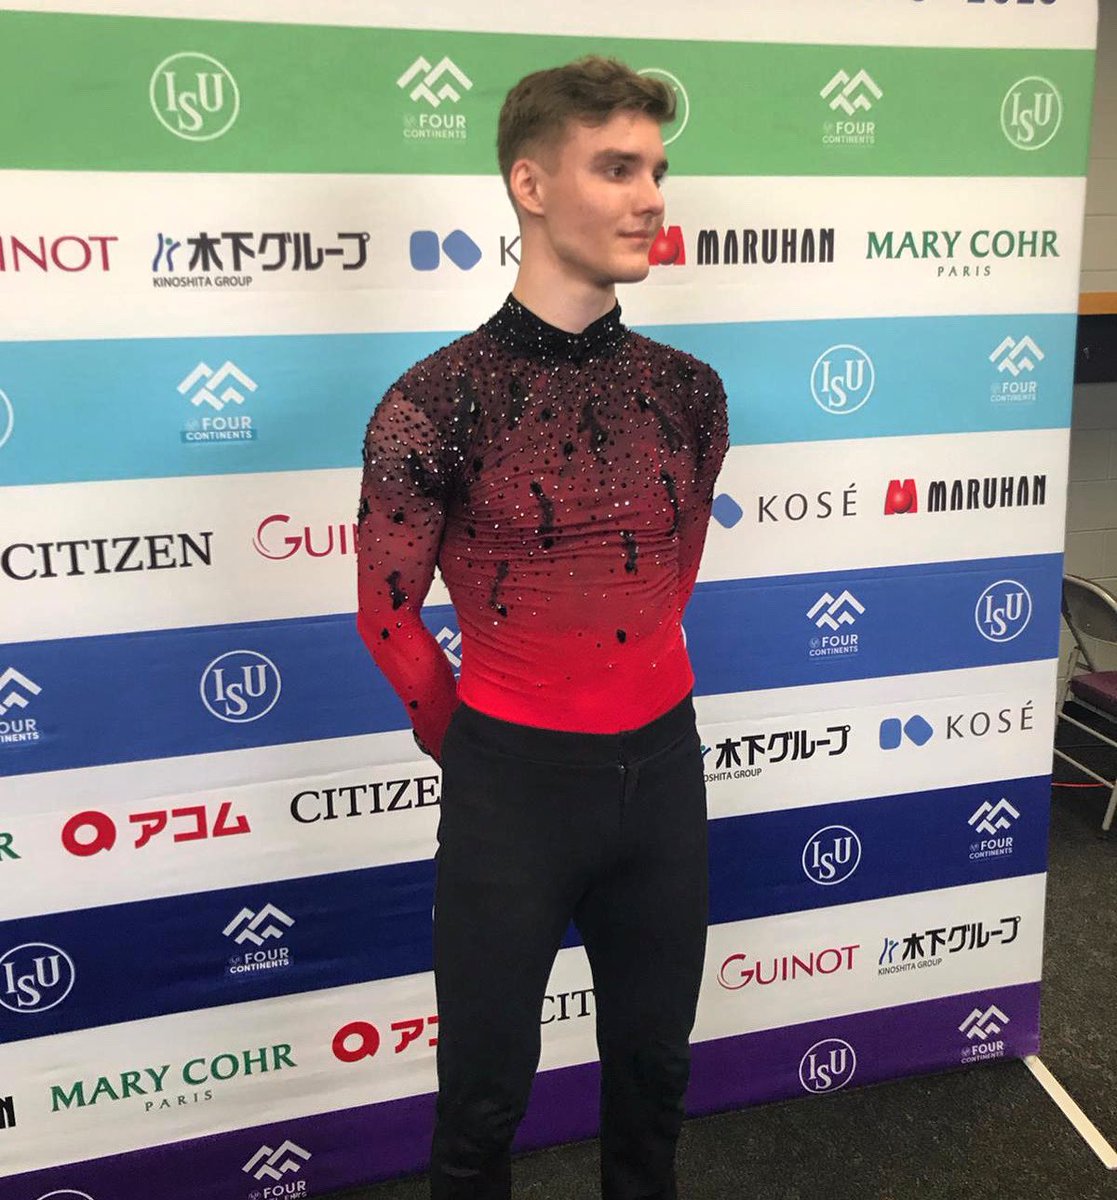 #ConradOrzel 🇨🇦 PB 80.09: 
“I am very pleased with my SP especially with landing the two quads with positive GOE. It’s something I can do in practice but so far never in competiton I am starting to gain confidence in myself. Nationals and good practices gave me that confidence. I